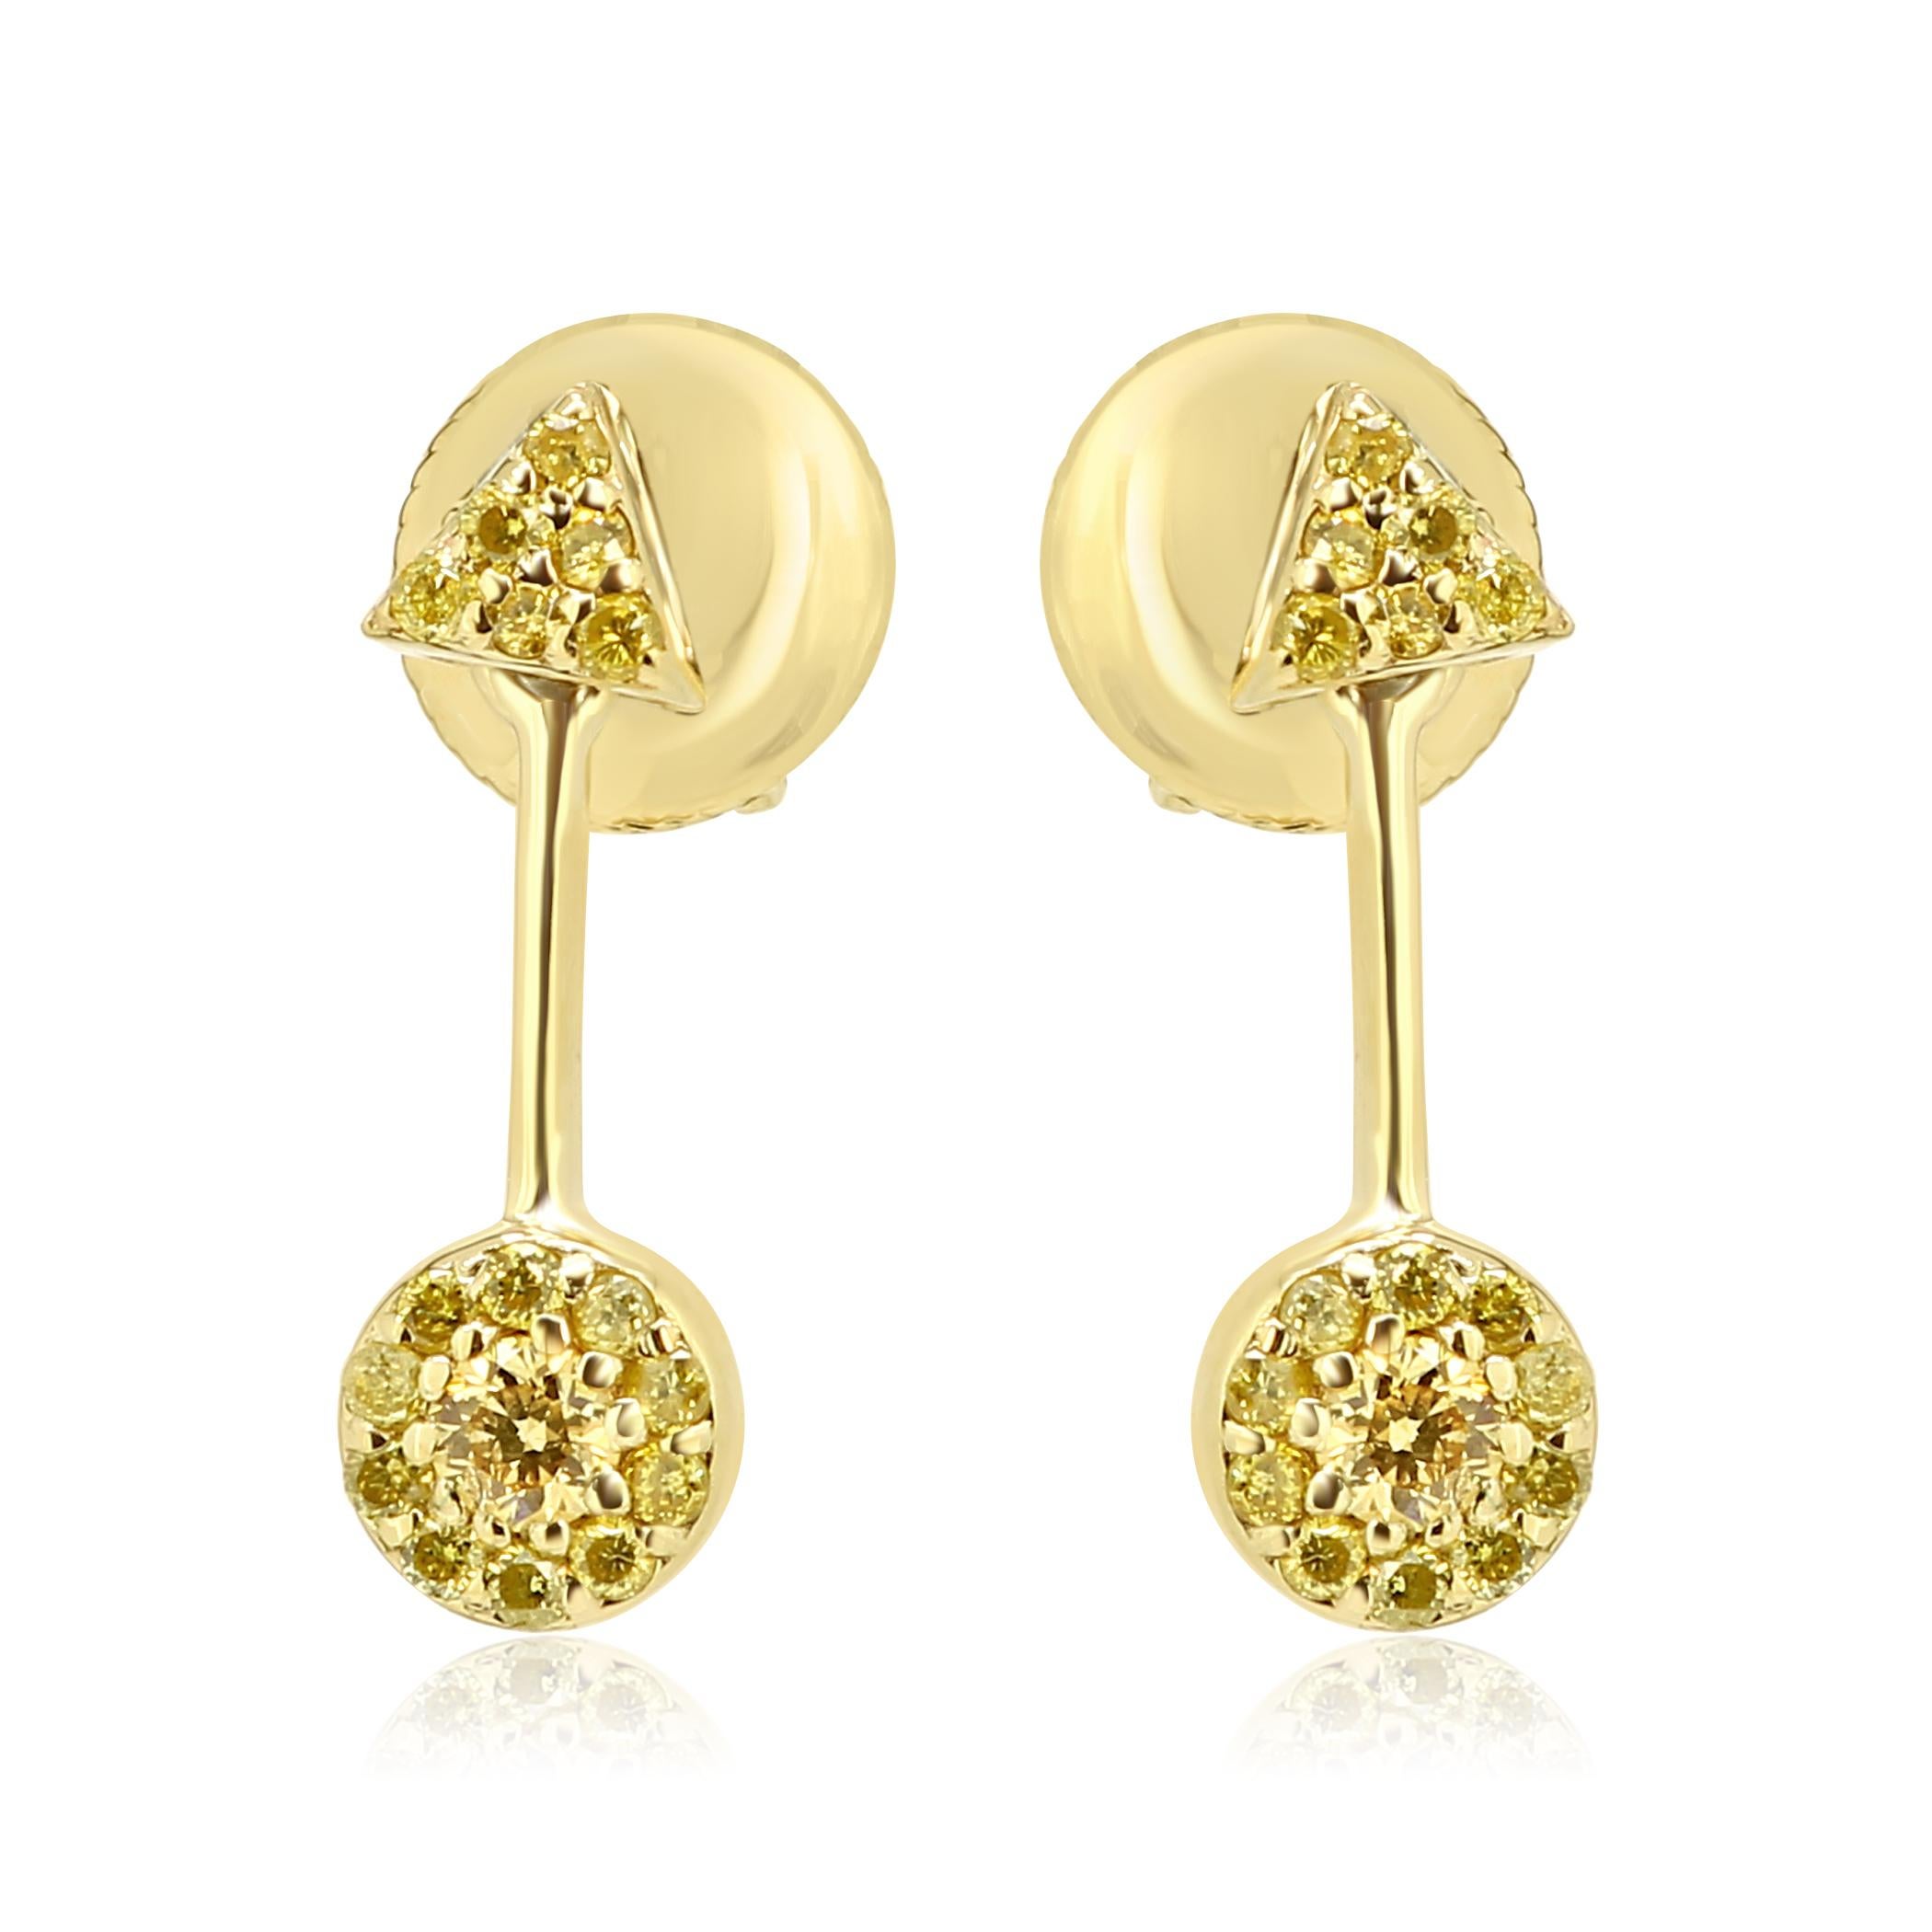 Chic every day wear Natural Fancy Yellow Diamond 0.40 Carat set in 14K Yellow Gold Dangle Drop Earring.

MADE IN USA
Total Diamond Weight 0.40 Carat